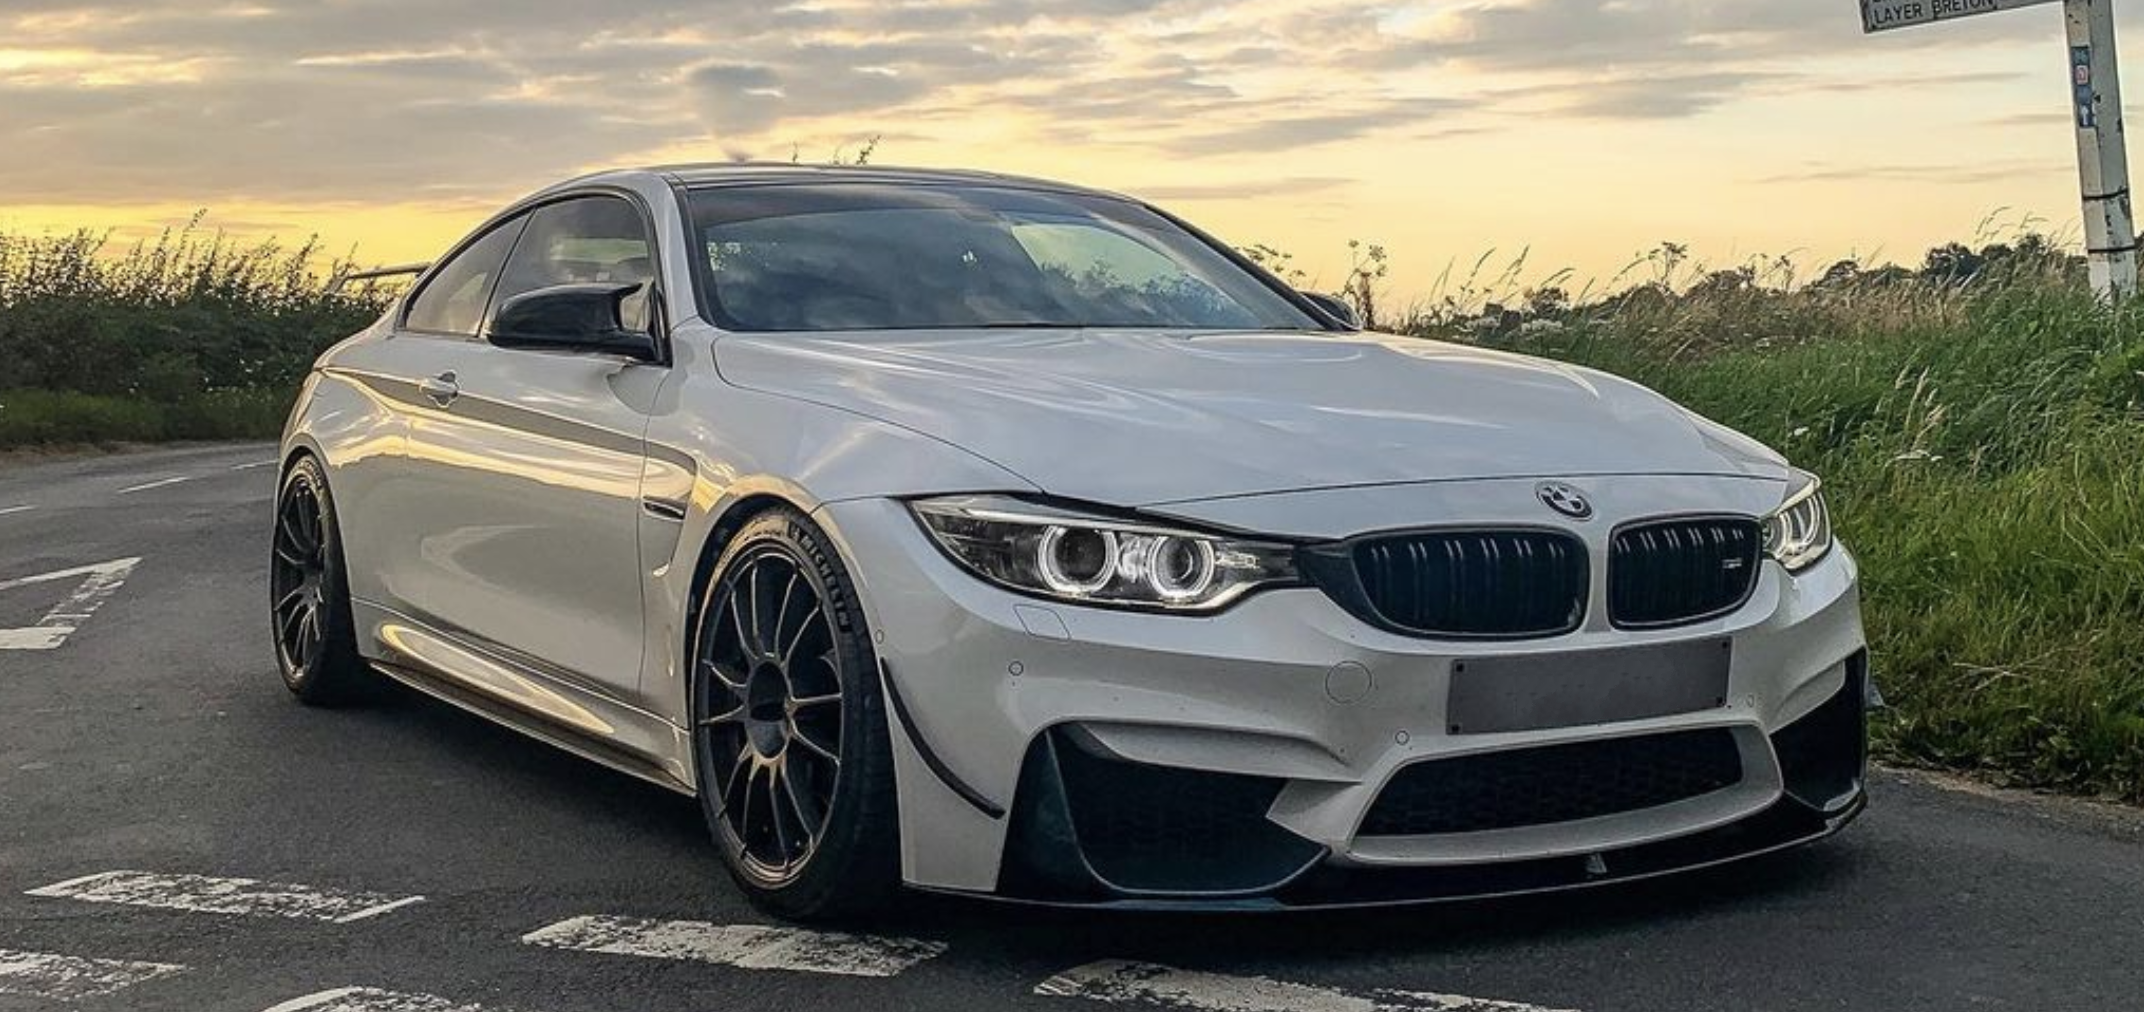 BMW M3/M4 F80/F82/F83 Carbon Fiber Front Bumper Canards are the complete solution to tune the handling for the front of a car aerodynamically. Made of lightweight and durable carbon graphite composites, Carbon Fiber Front Bumper Canards help increase front downforce at high speed.